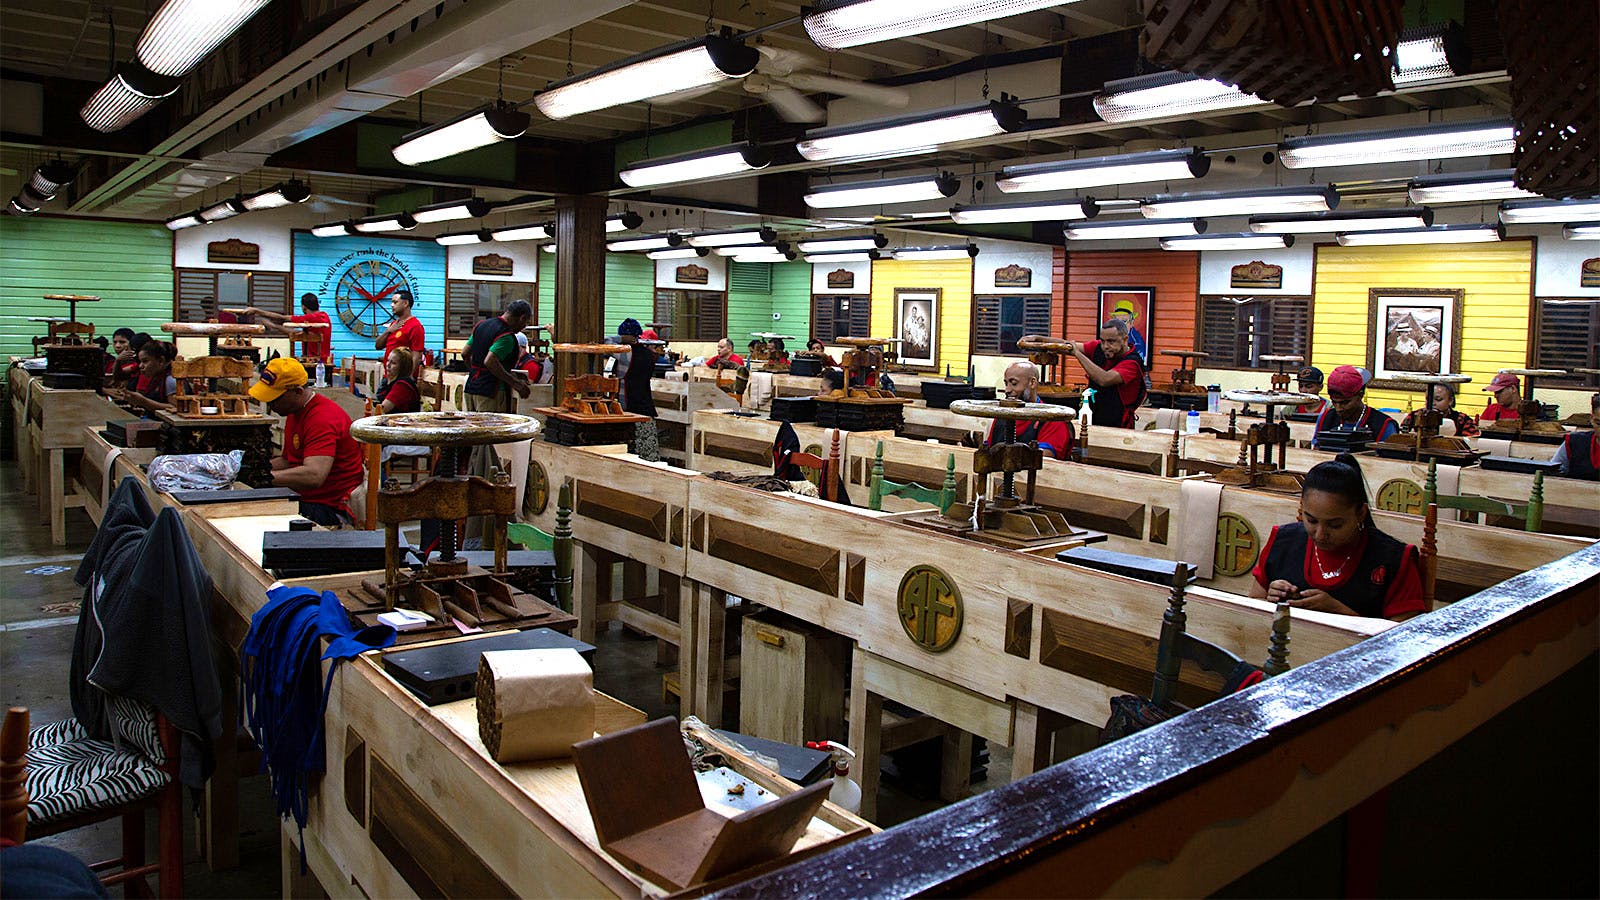 The rolling gallery for all Don Carlos cigars. Look closely behind the worker turning the vice and you’ll see a portrait of the late Carlos Fuente Sr., watching over his production floor.